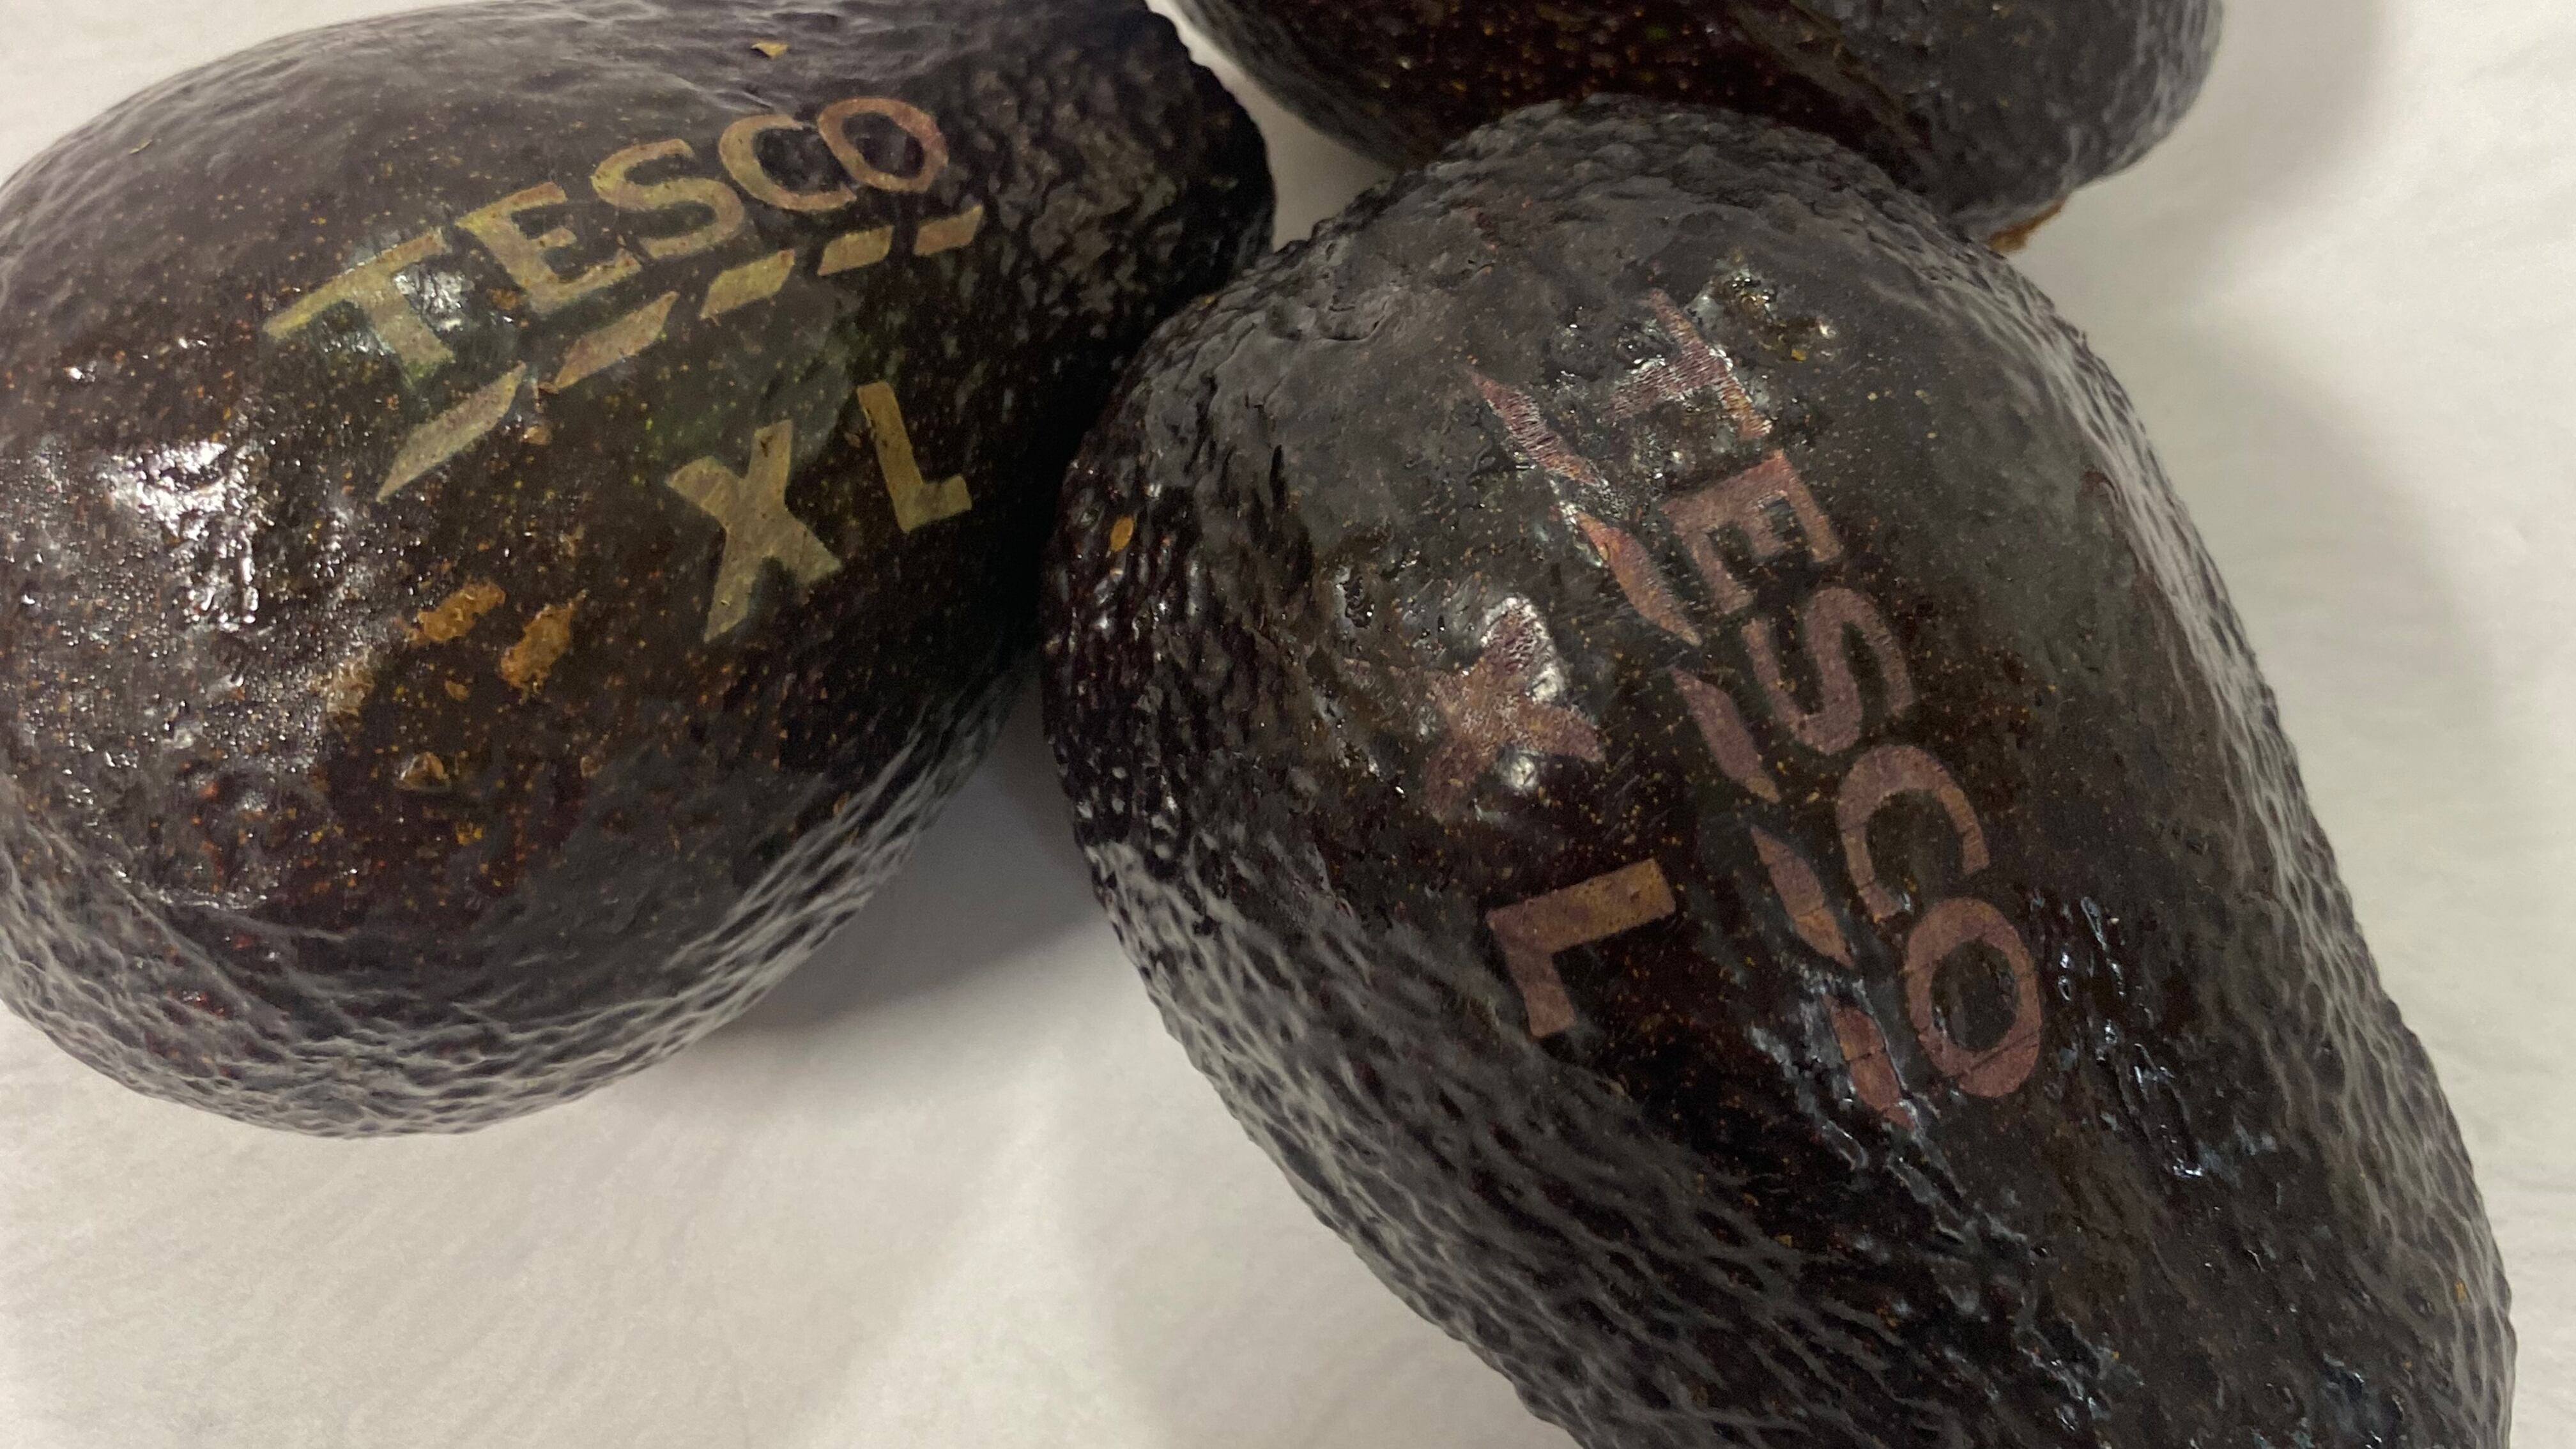 Tesco is to use laser-etchings on its extra large avocados instead of stickers in a trial designed to help the environment